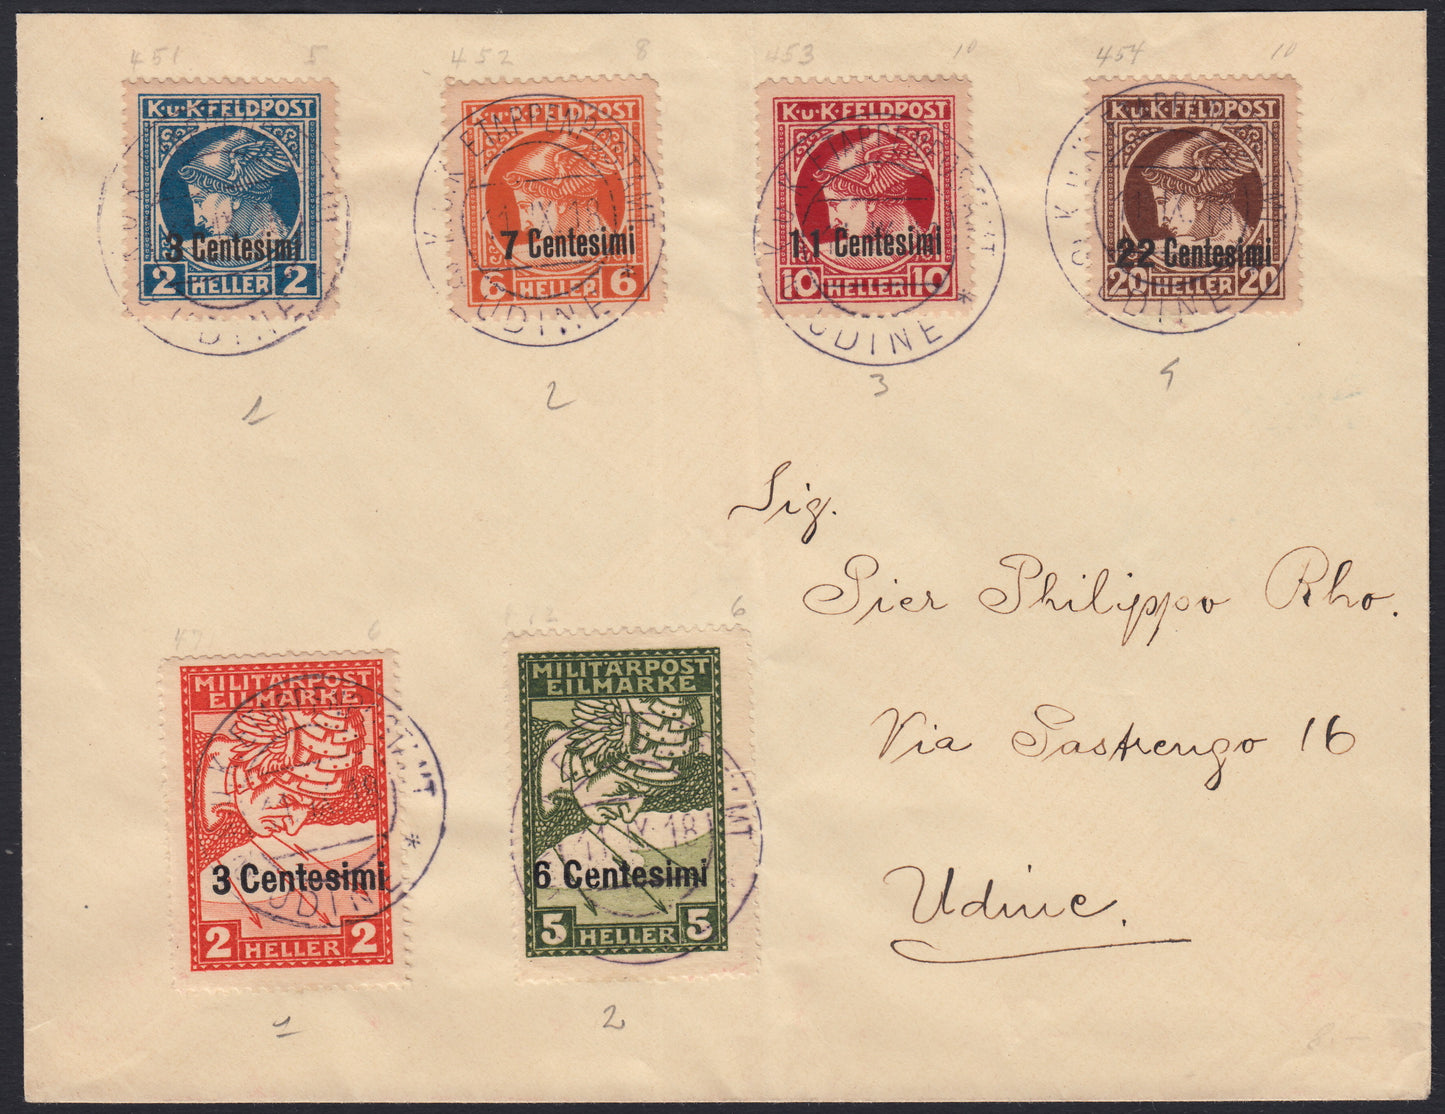 OA110 - 1918 - Franked letter with newspaper issue + express issue in complete series (E1, E2 + G1/4).